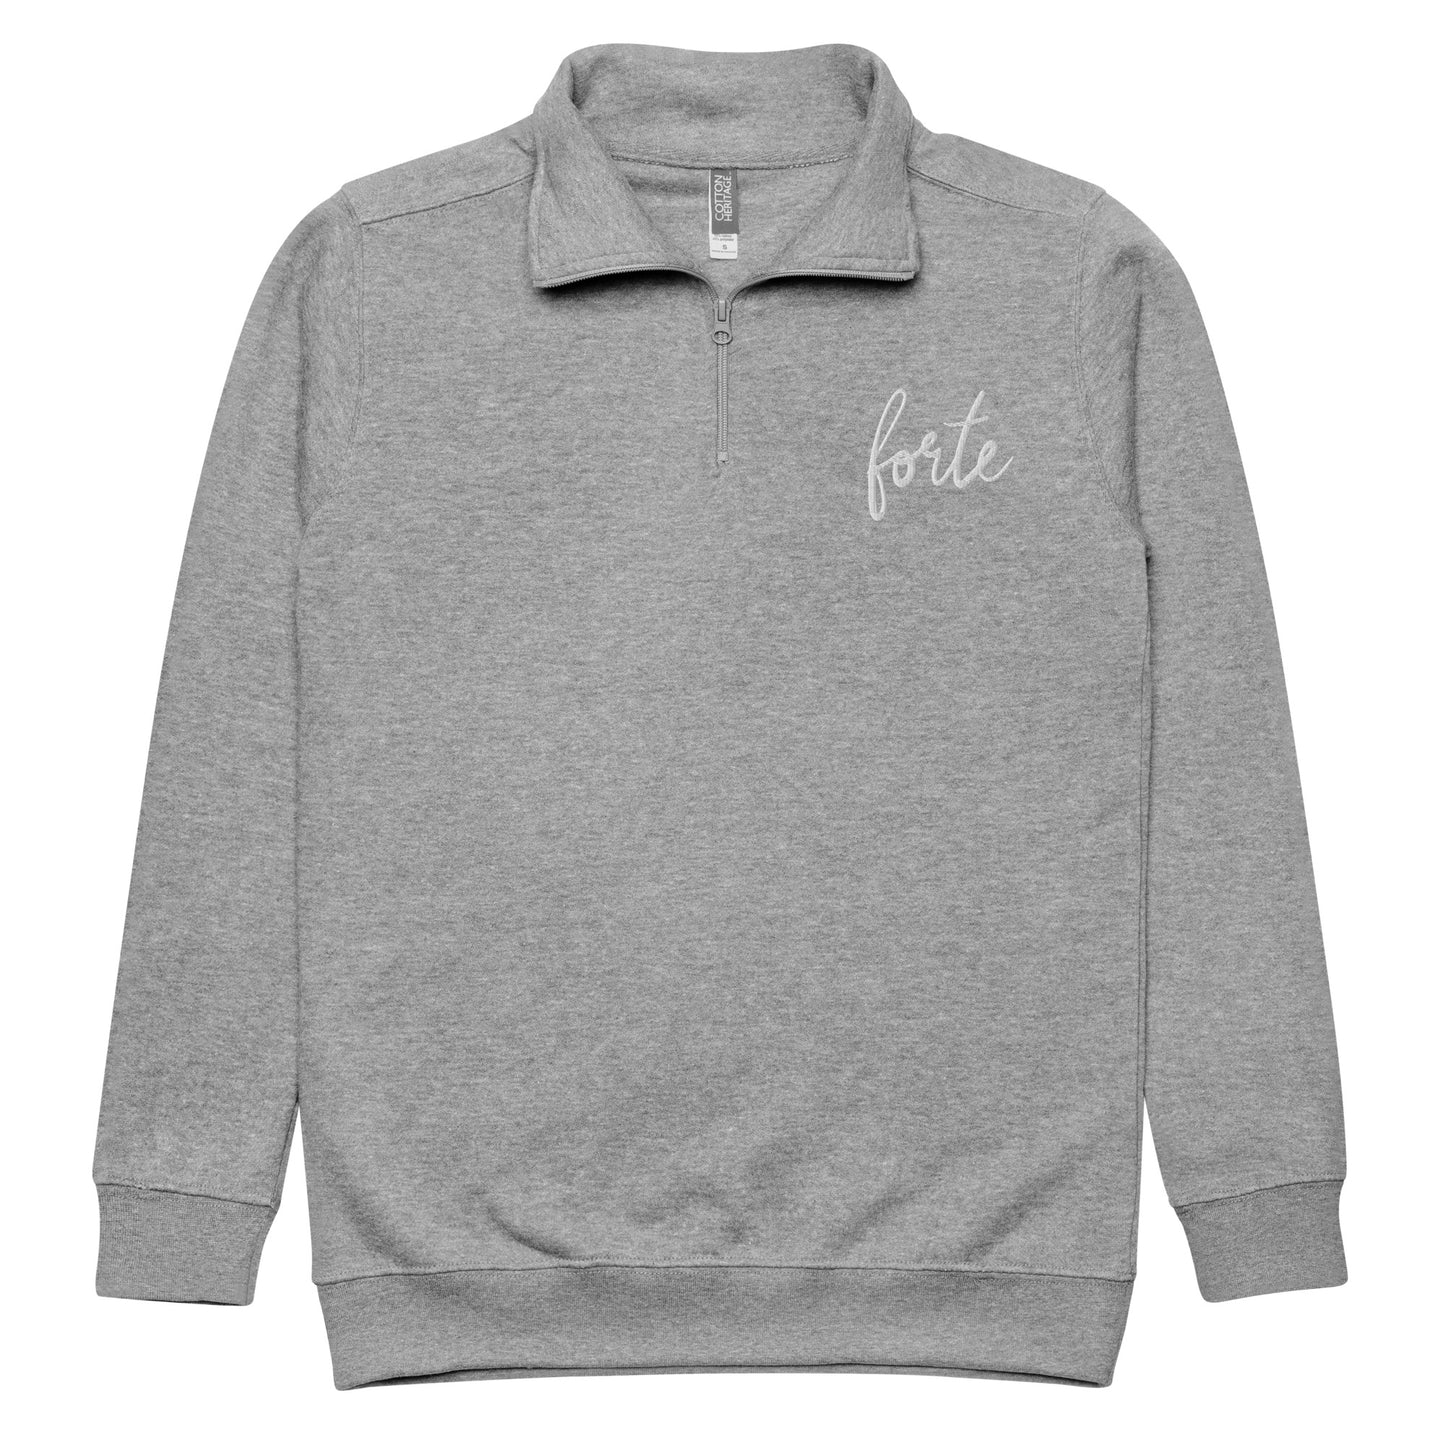 Adult - Cotton Heritage embroidered fleece pullover